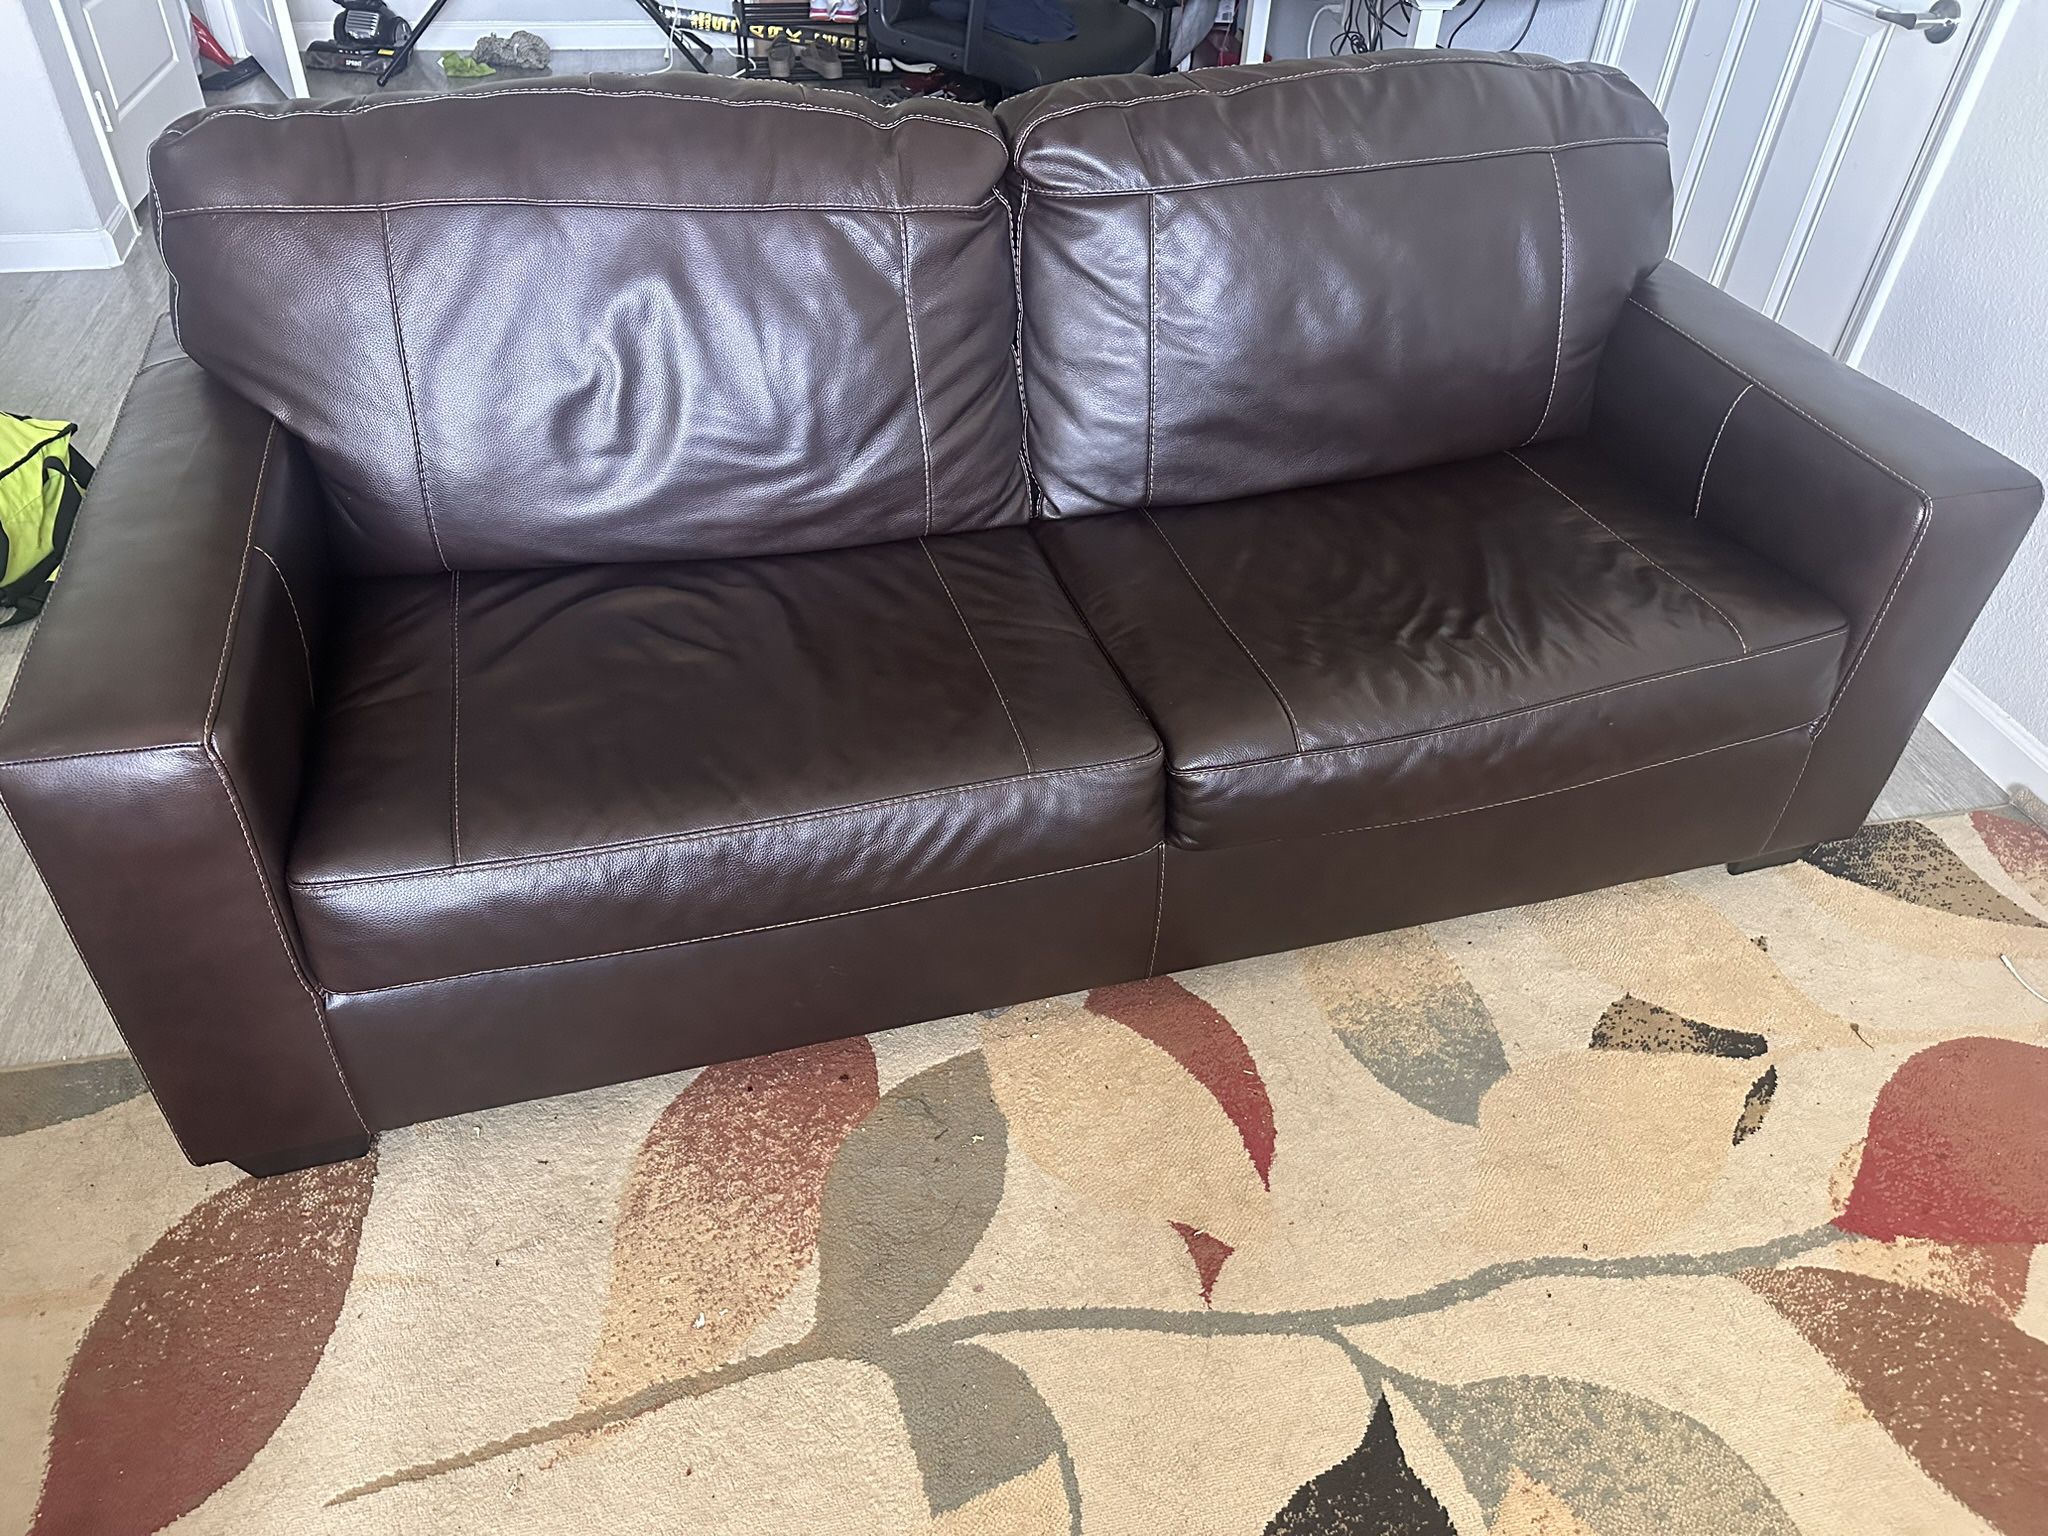 Couch For Sale!!!! Moving Out…. 